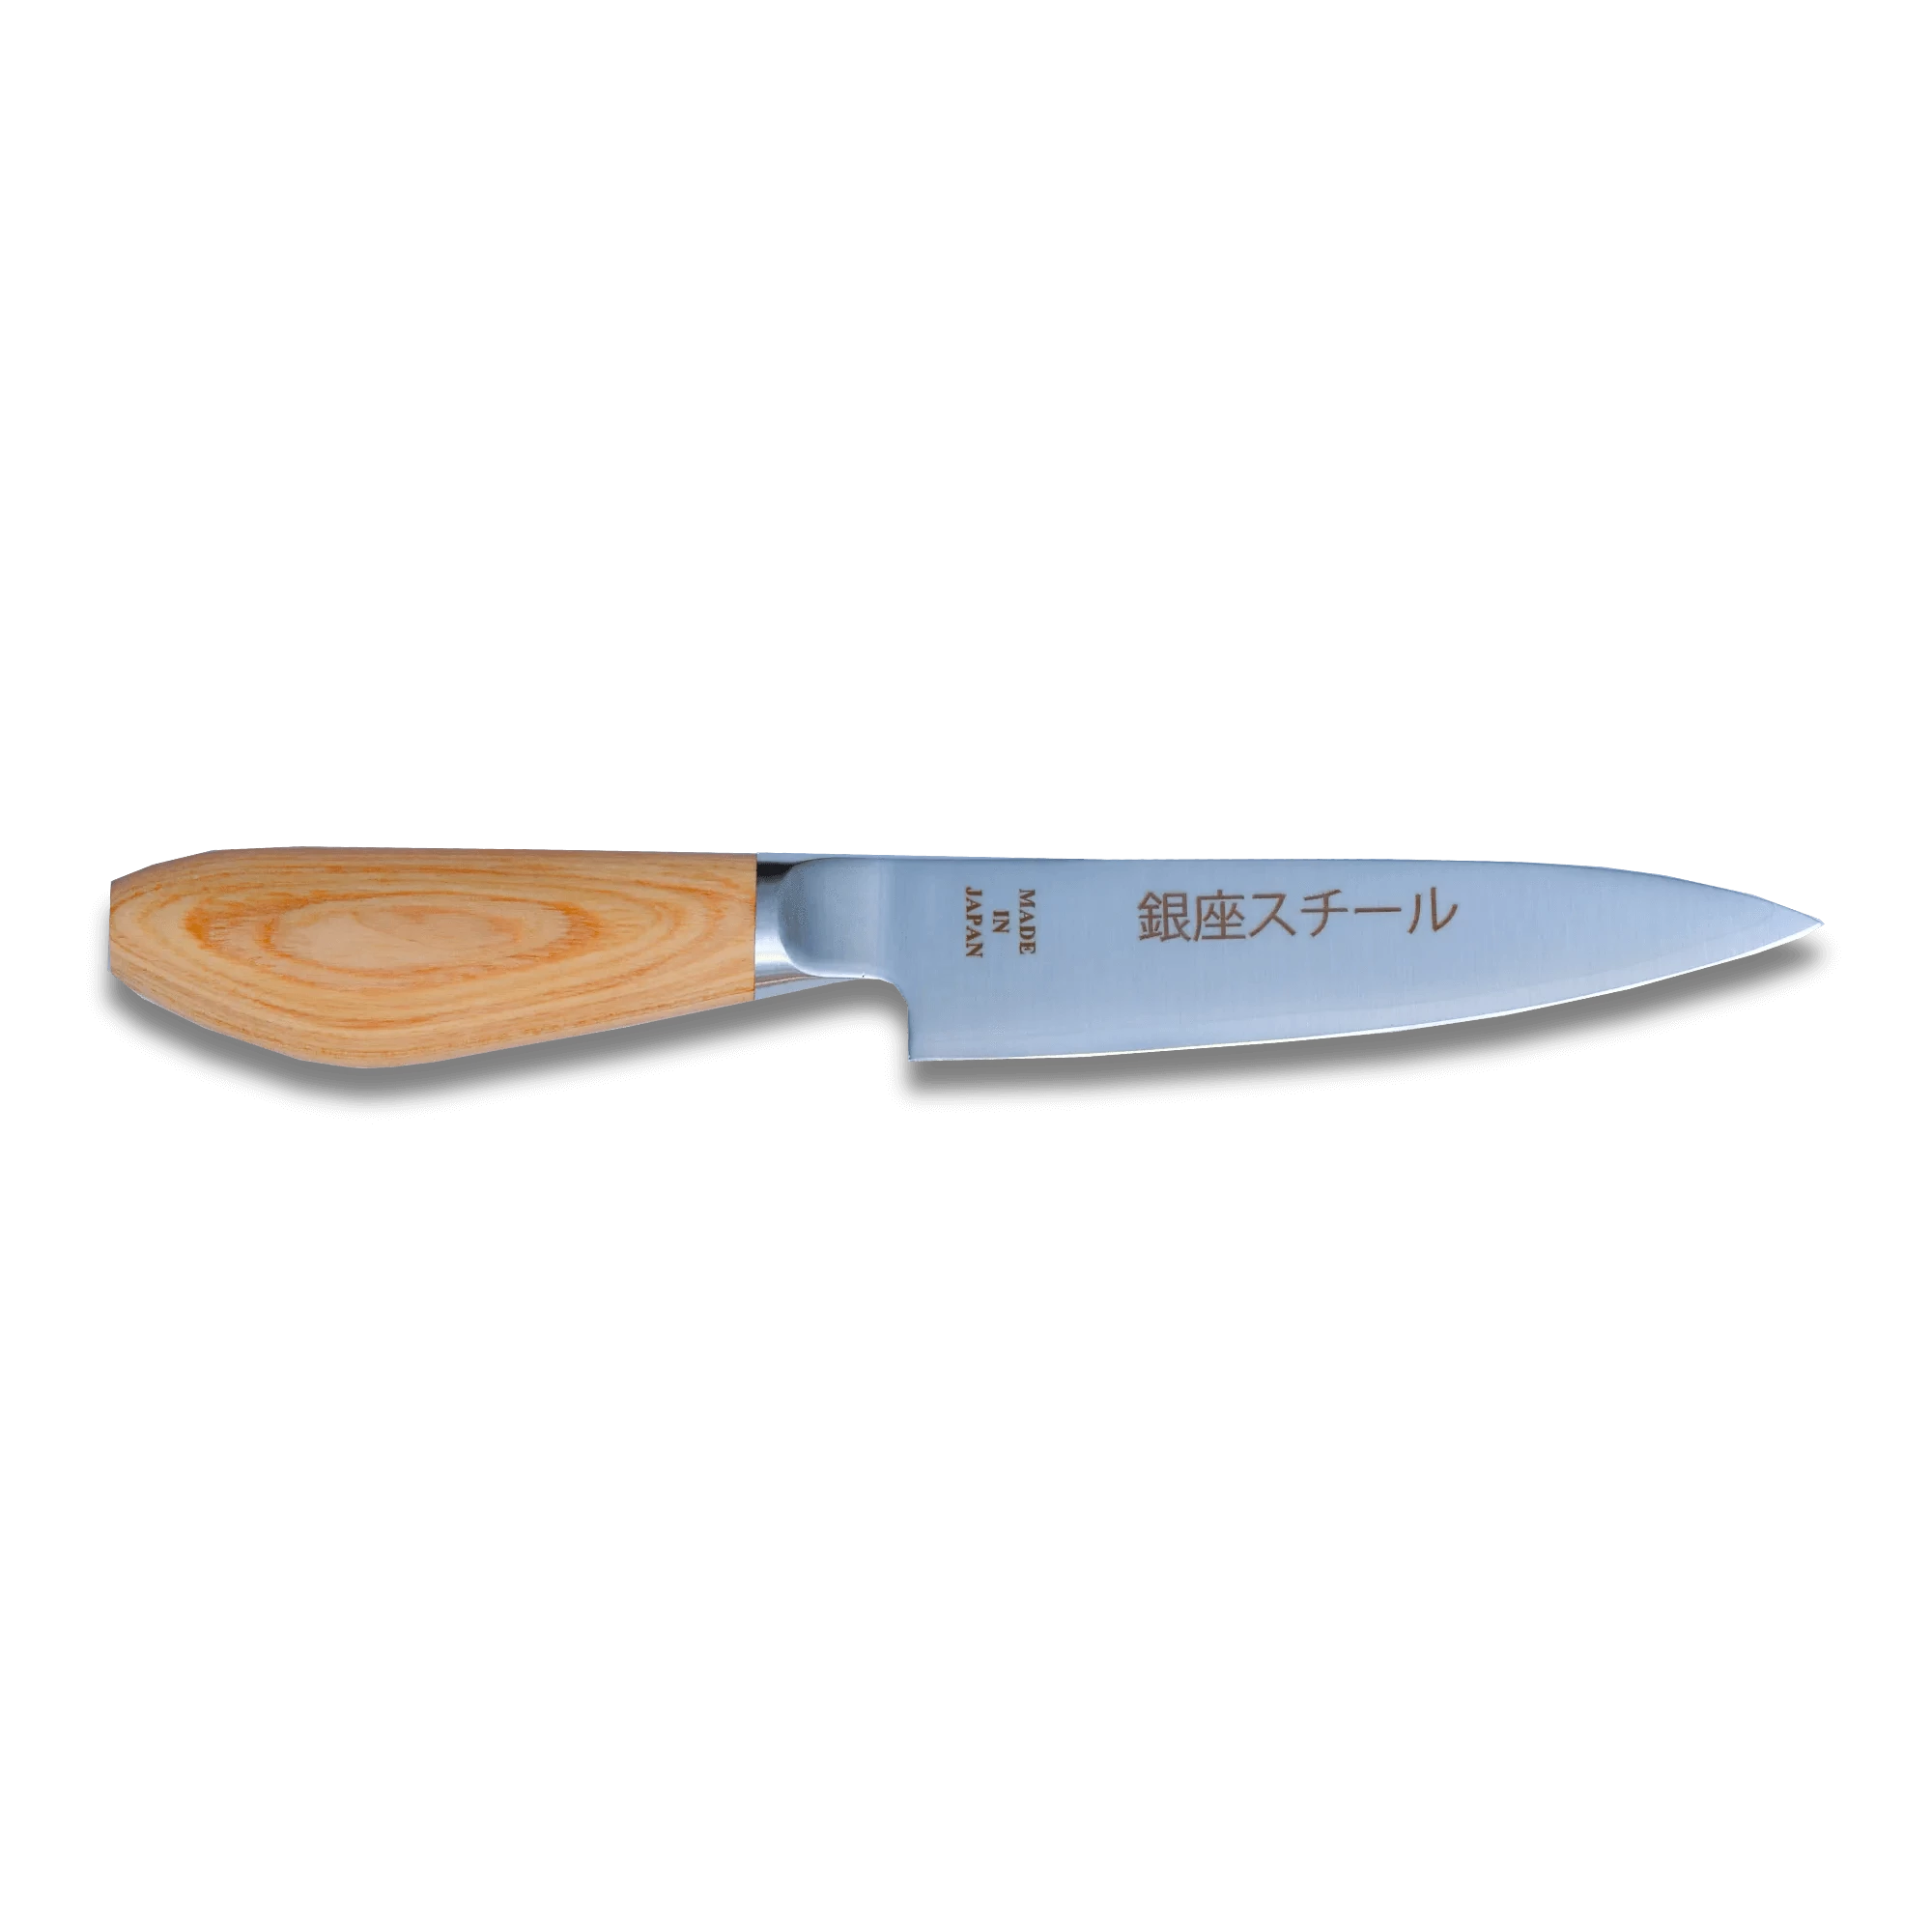 MATSUE 130 - MV Stainless Steel Petty Knife 130mm/Natural Wood Handle